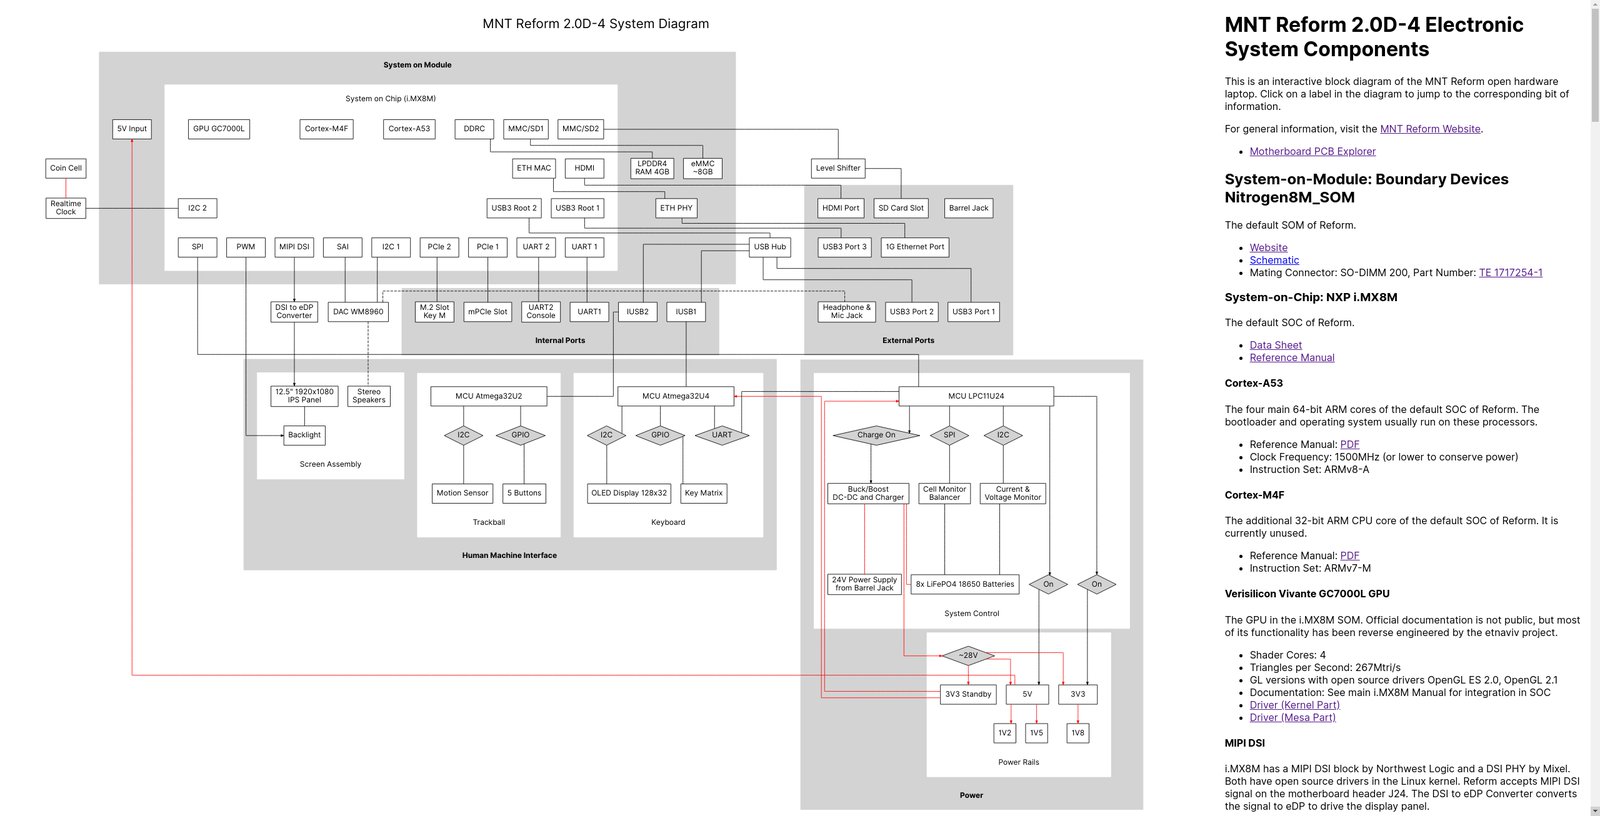 MNT Reform interactive system diagram